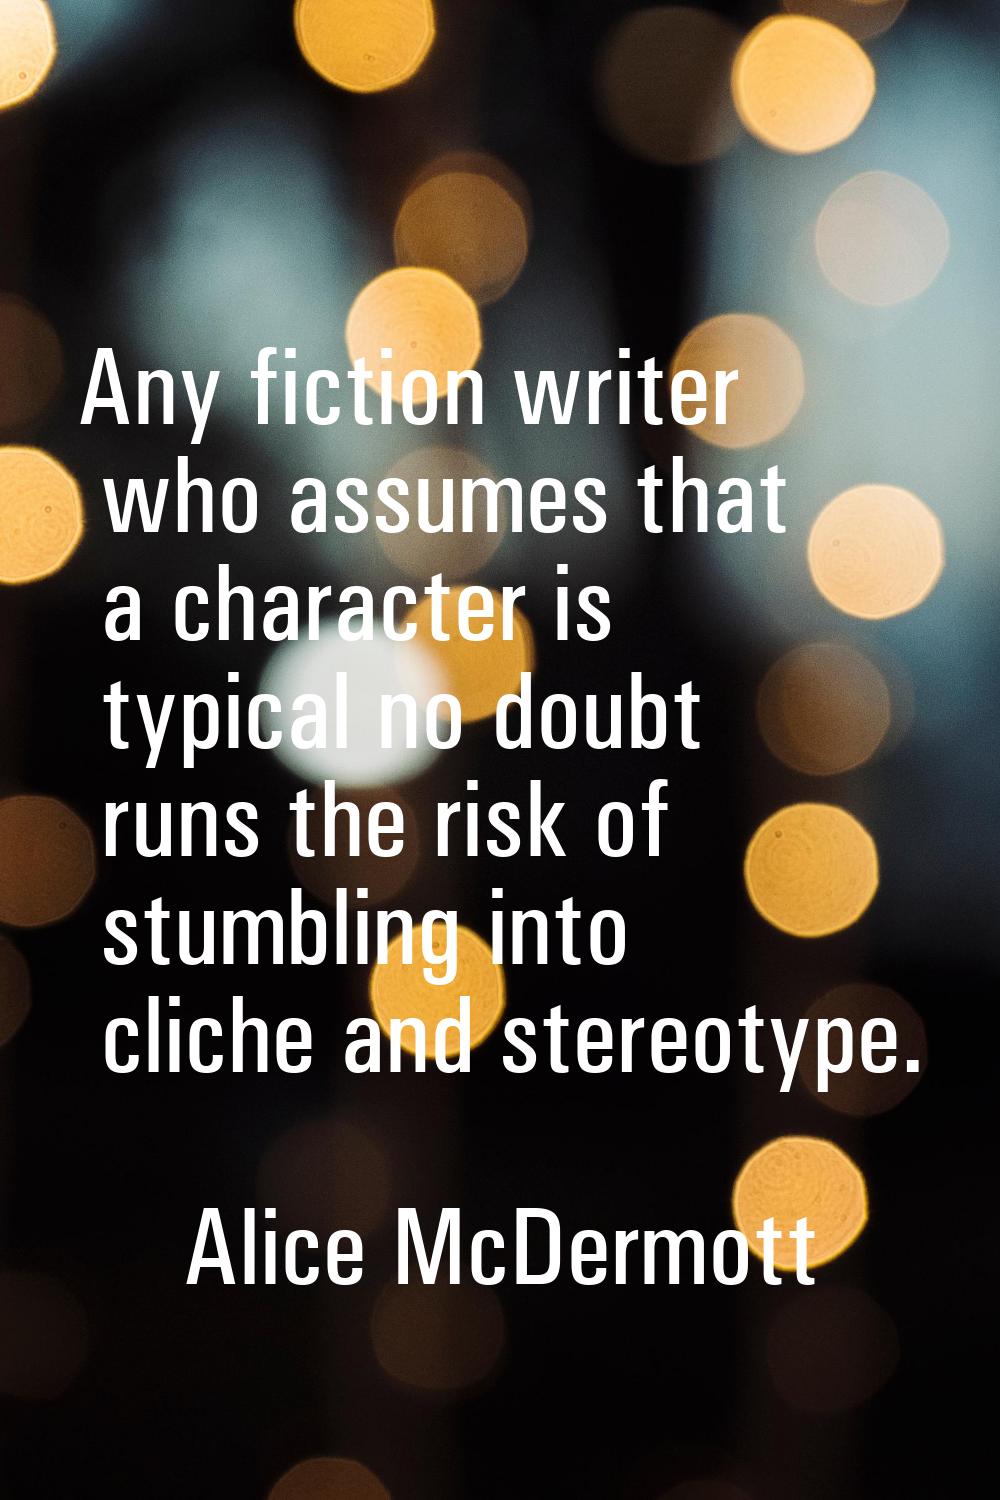 Any fiction writer who assumes that a character is typical no doubt runs the risk of stumbling into